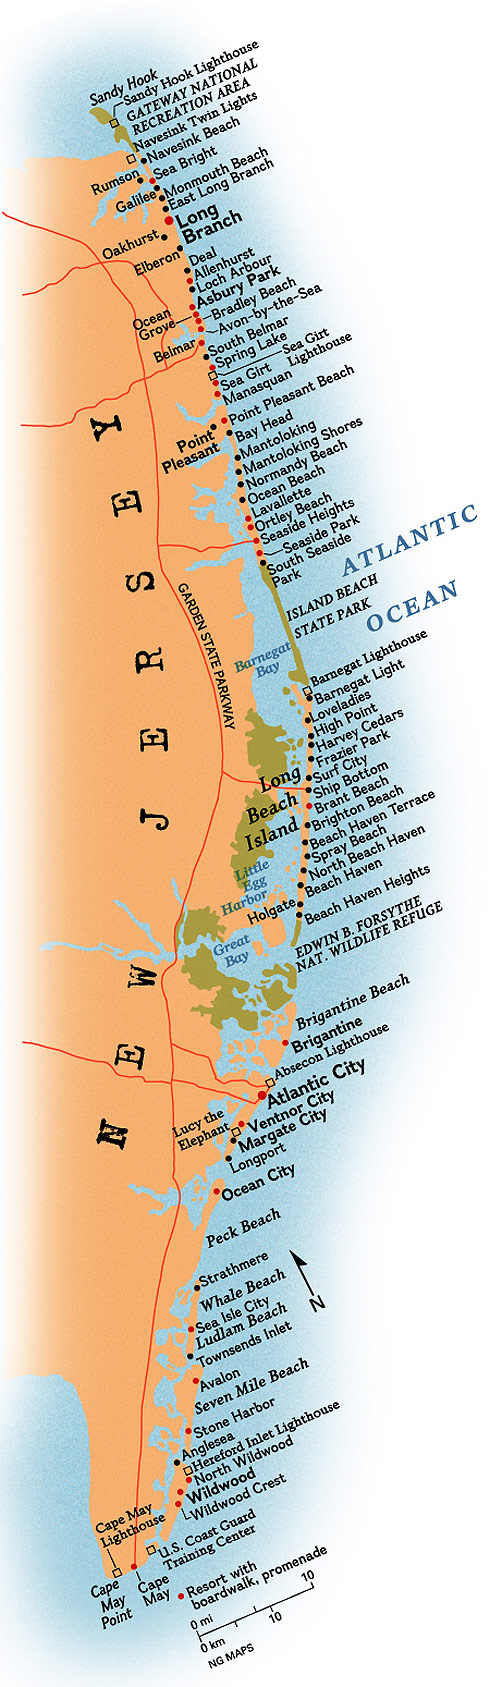 Jersey Shore Map Of Beaches